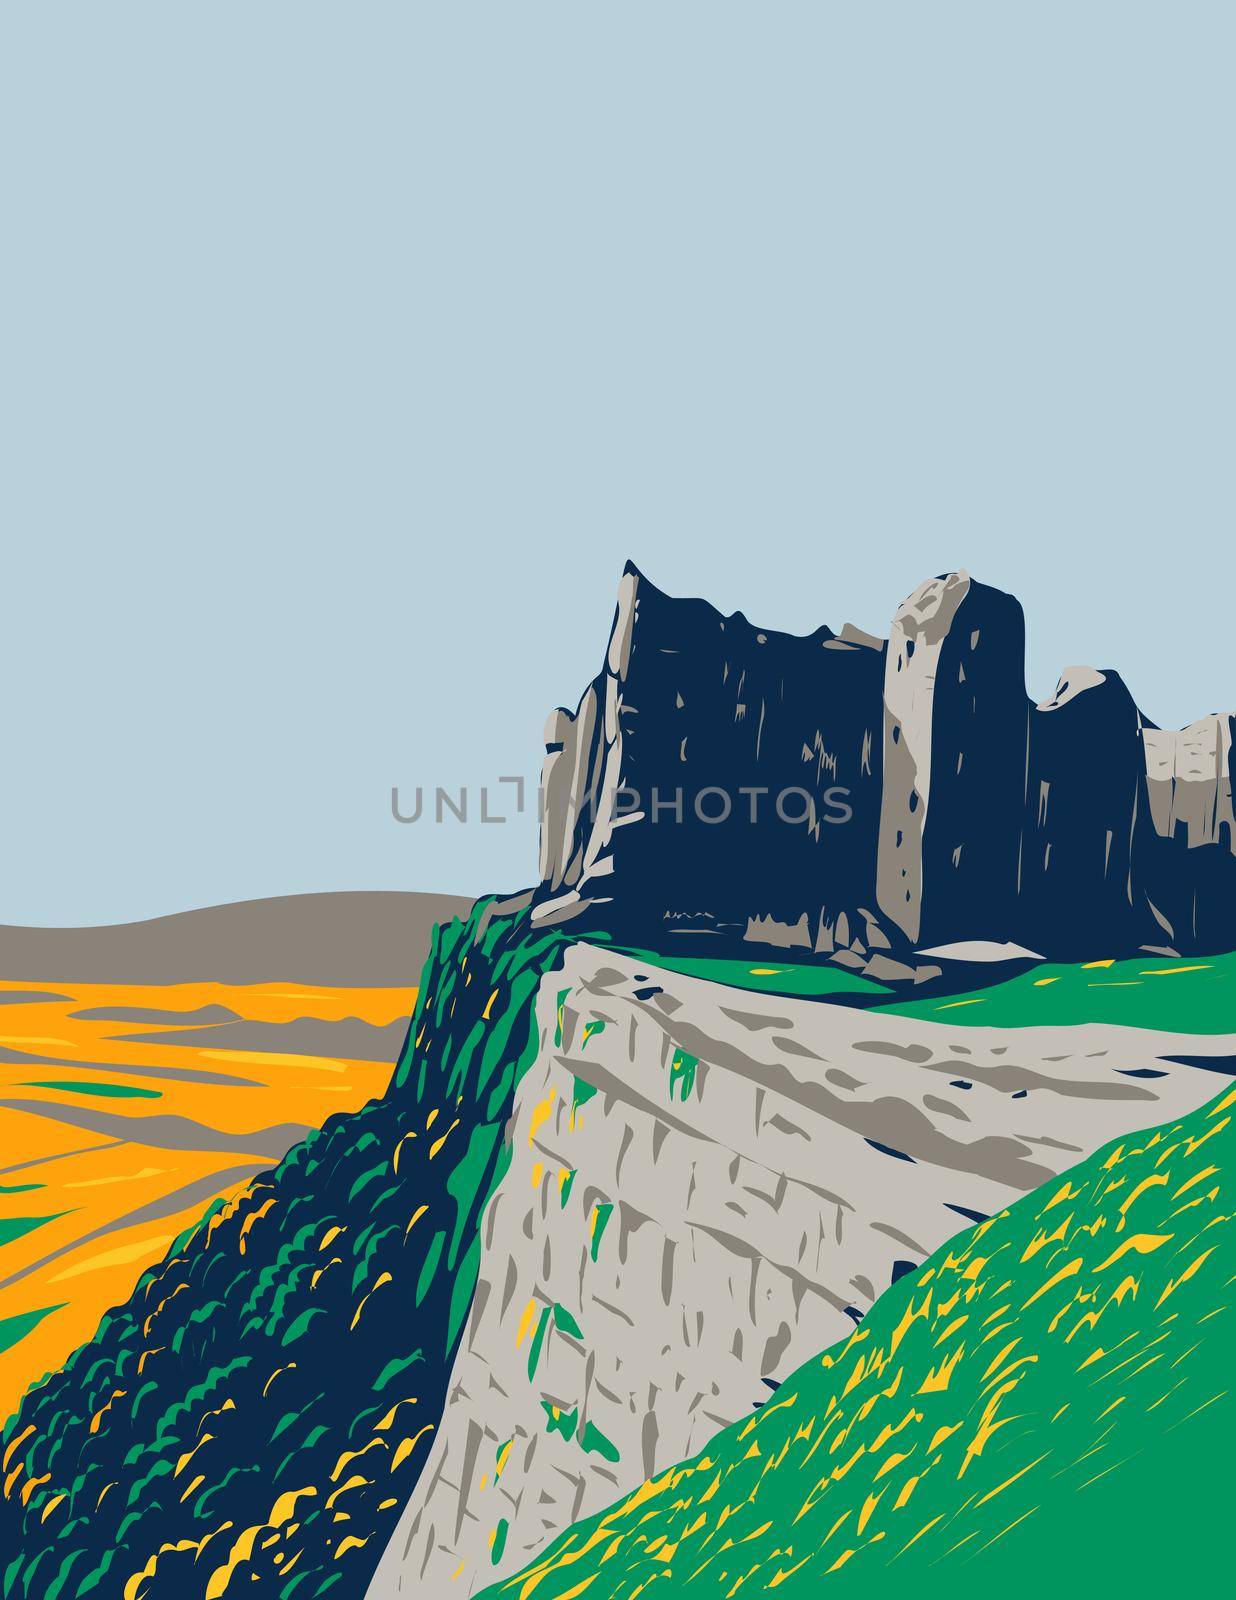 Art Deco or WPA poster of the Carreg Cennen castle ruins located within Brecon Beacons National Park in Wales, United Kingdom done in works project administration style.